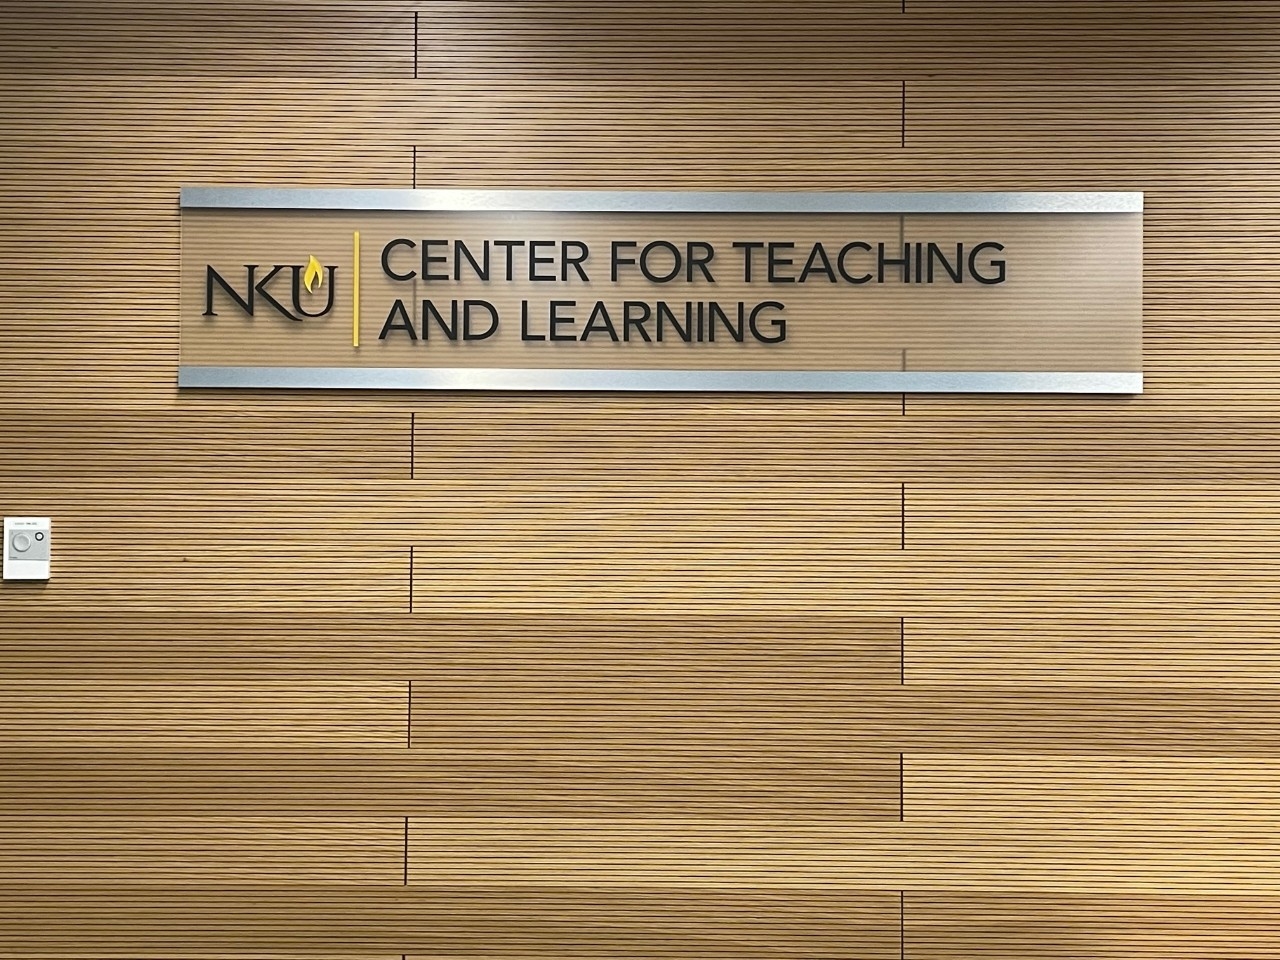 Center for Teaching and learning lobby.